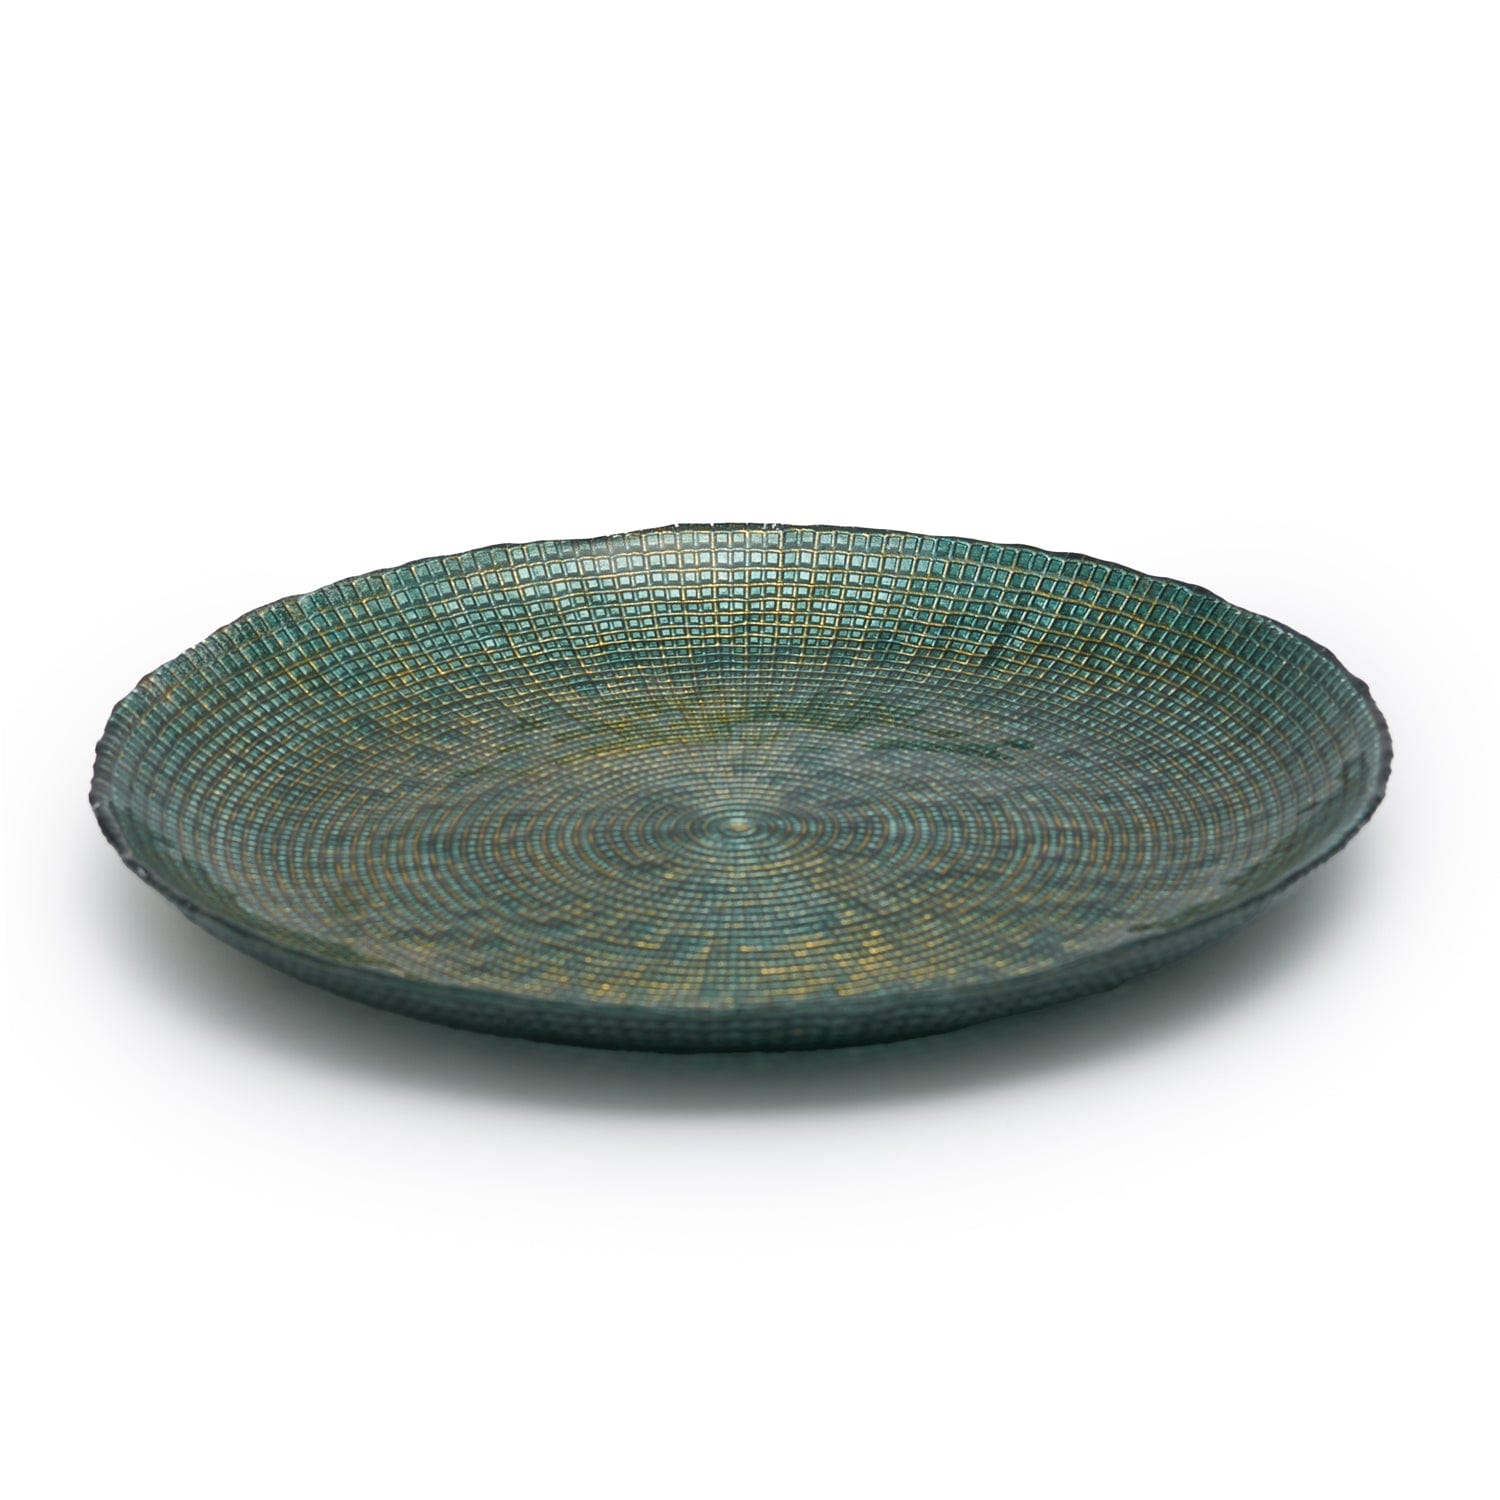 Glass Charger Plate Green Painted With Glitter - 1Q1894-772G